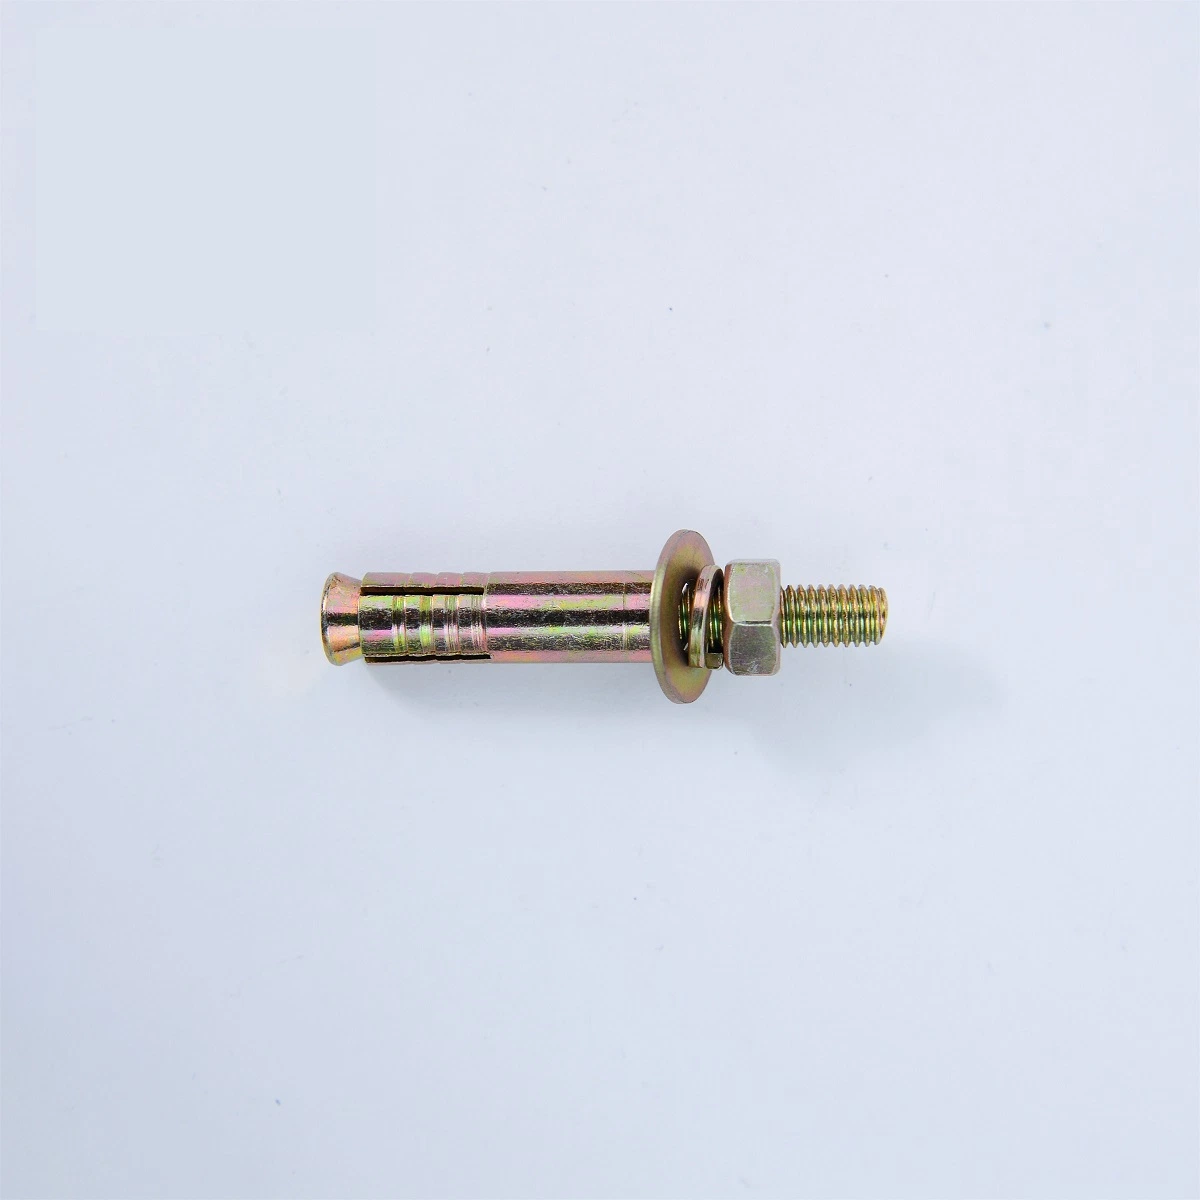 Factory Price Elevator Expansion Bolts with Hex Nuts Washer Wedge Anchor Concrete Lifting Anchor Bolt Carbon Steel Stainless Steel